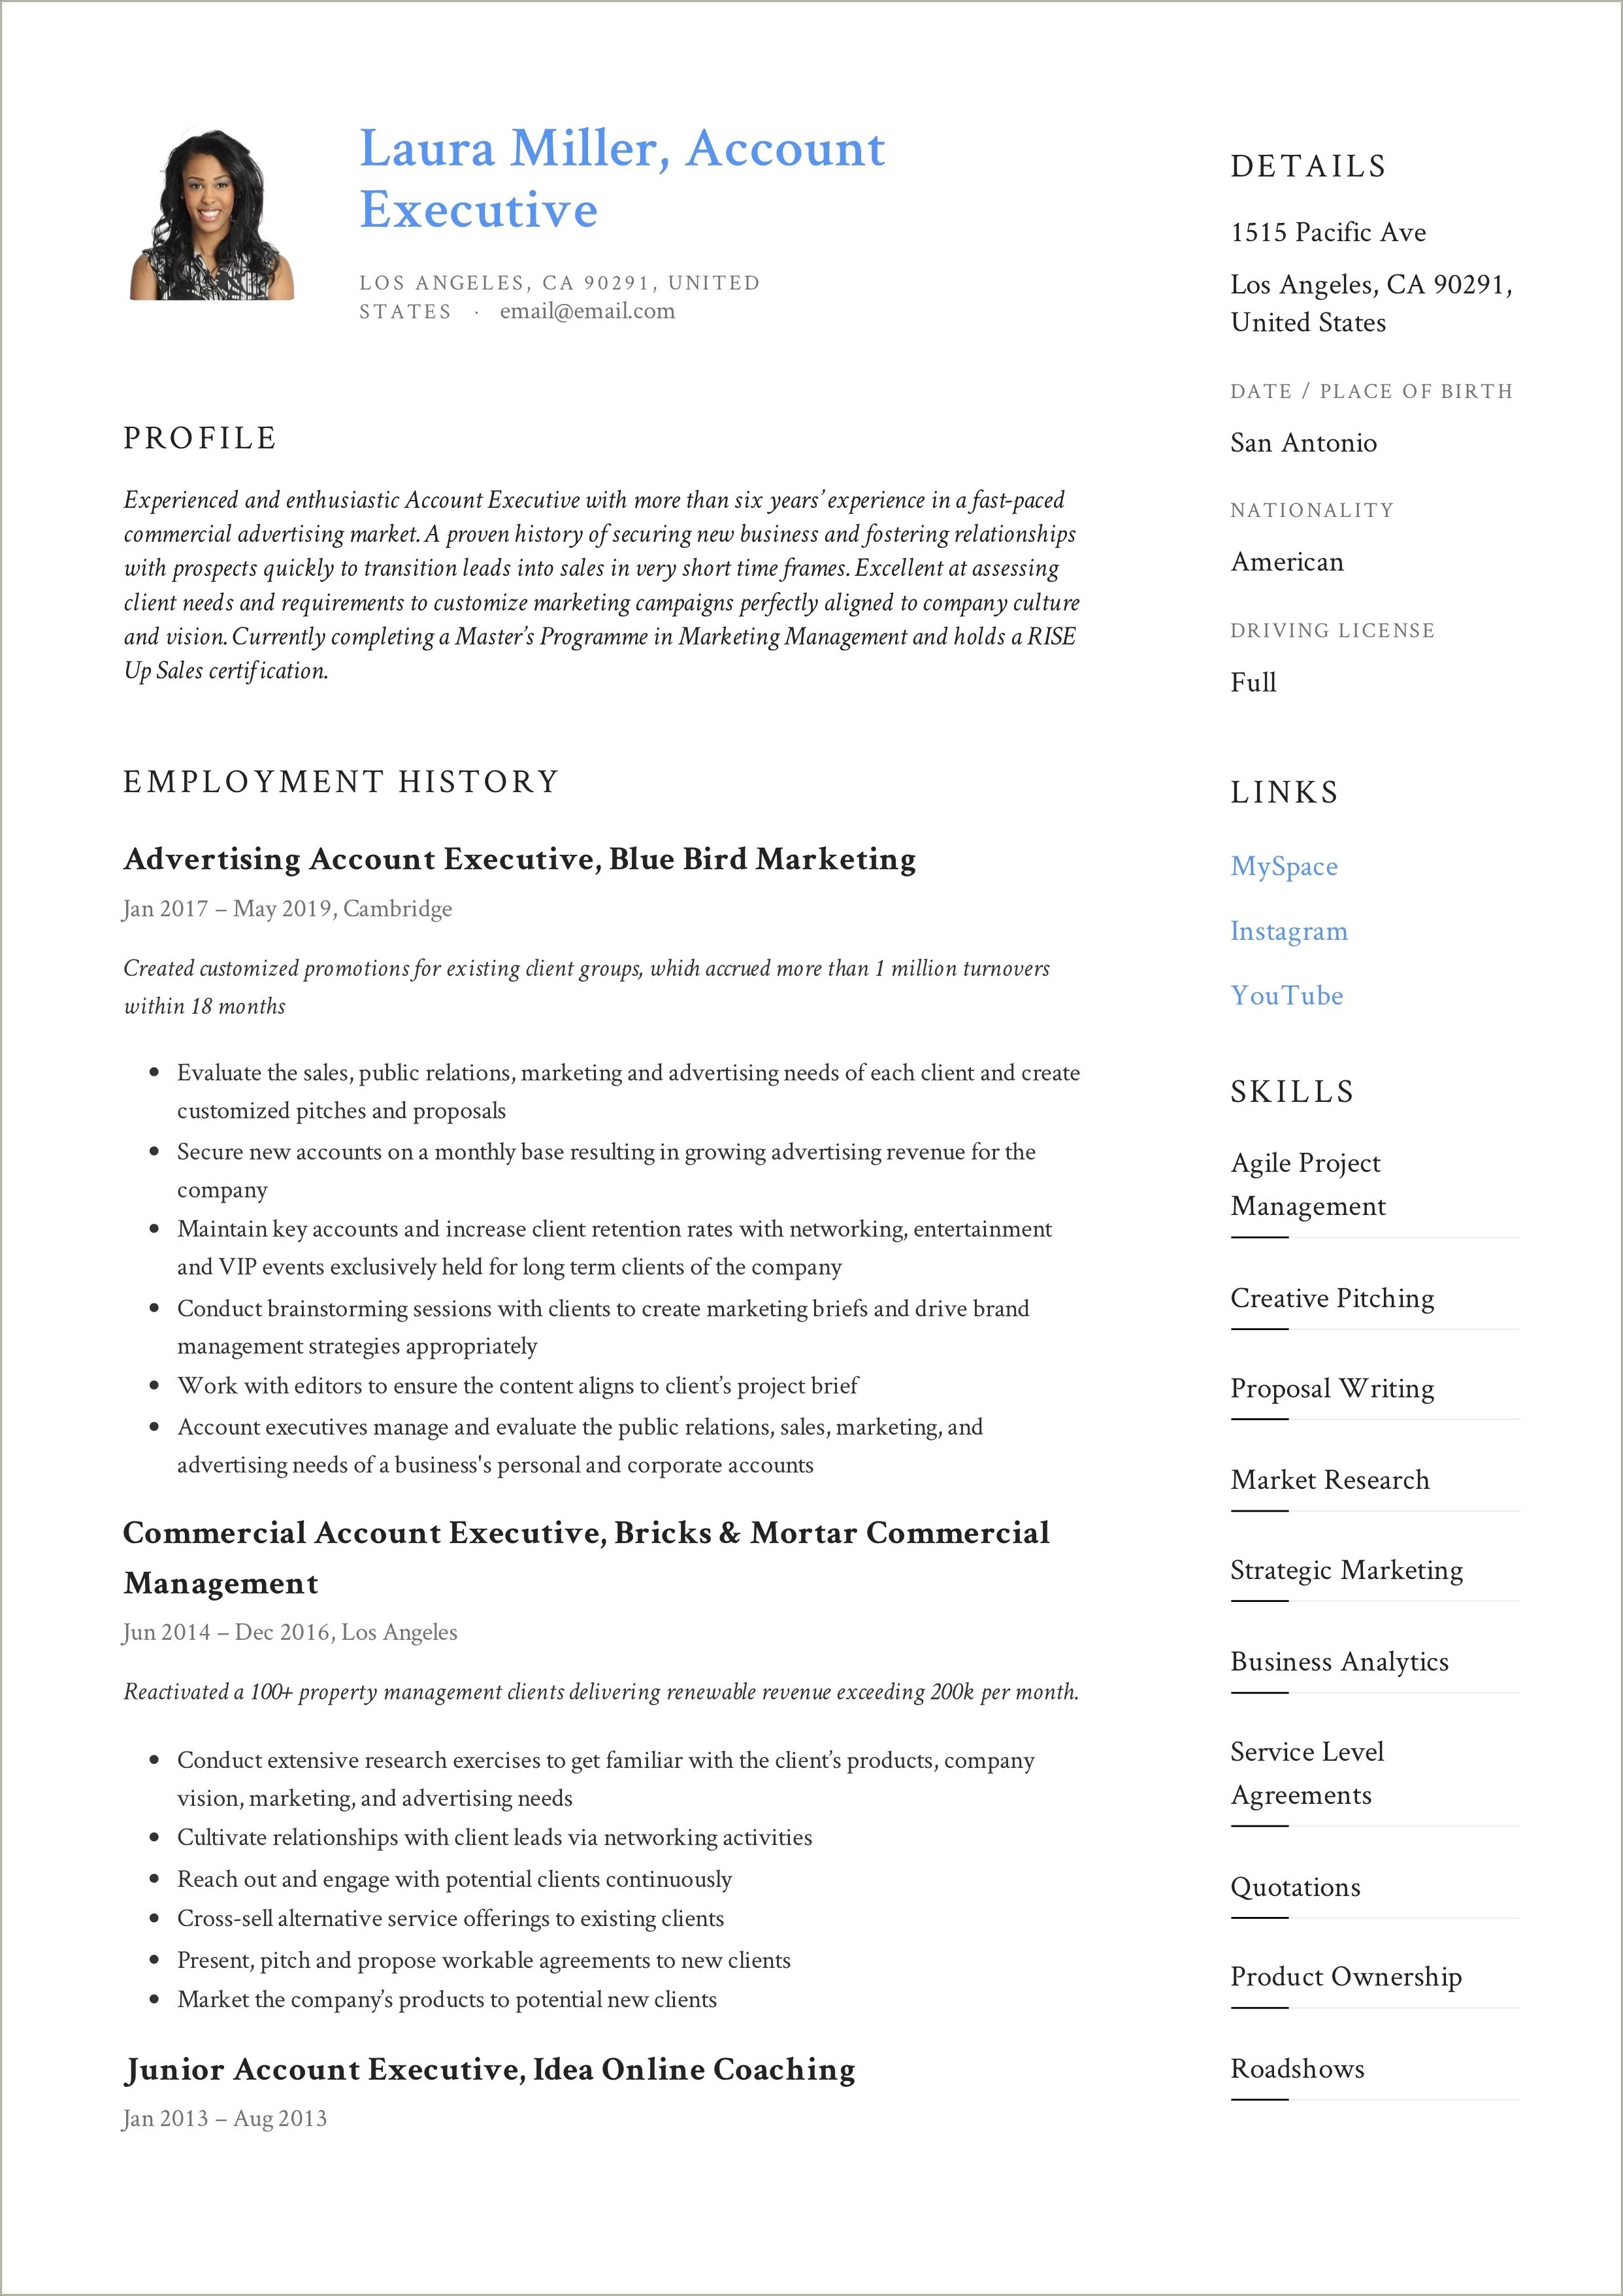 Short Pitch For Resume Example - Resume Example Gallery